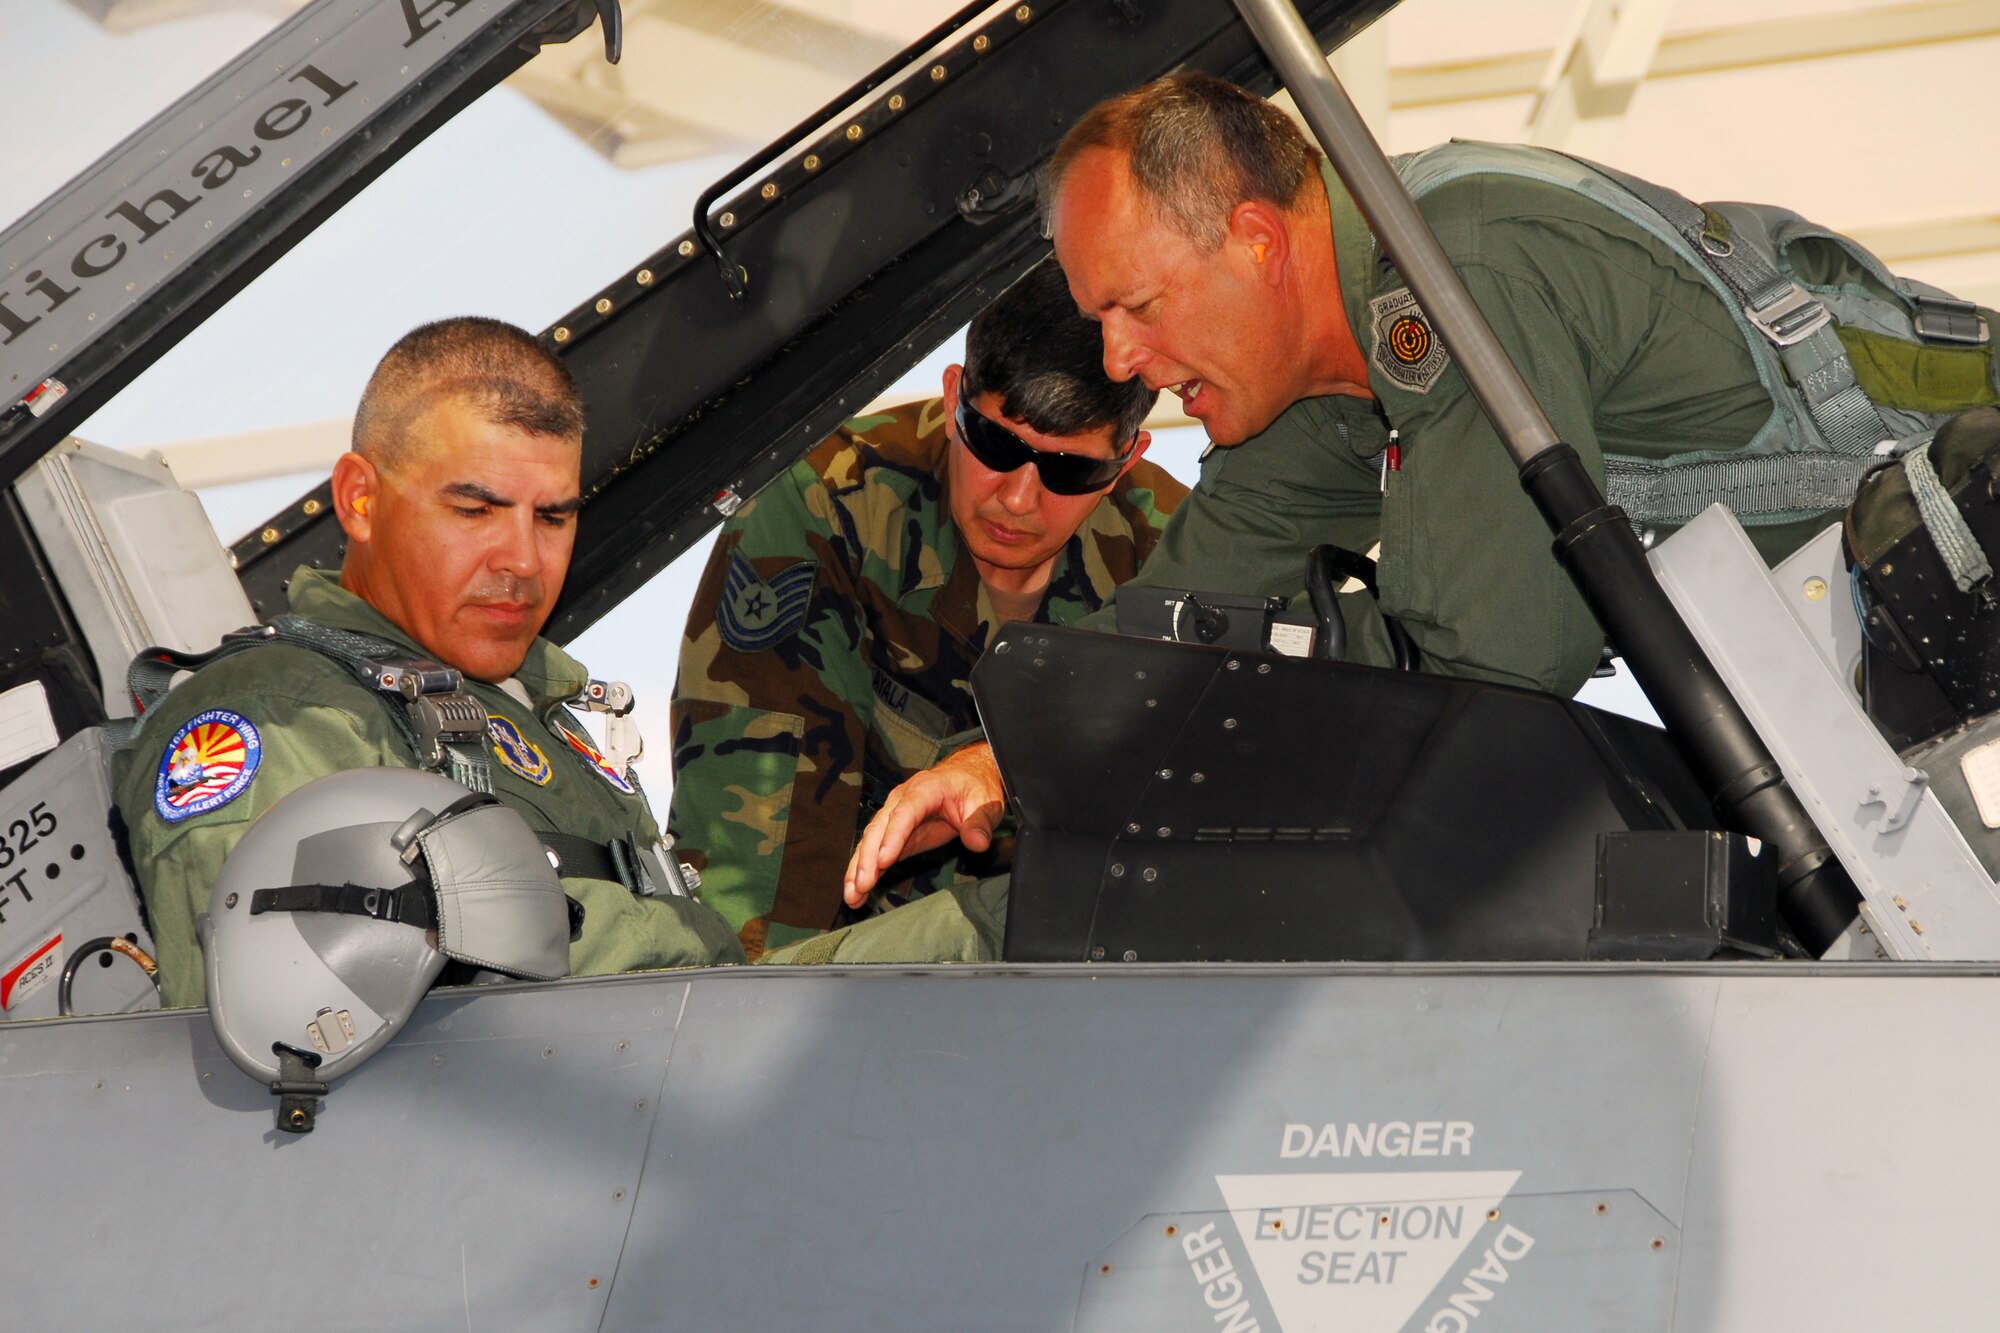 Maj. Gen. Hugo E. Salazar (left), Adjutant General and Commanding General of the Arizona National Guard, gets familiar with the back seat of an F-16D Fighting Falcon on the 162nd Fighter Wing flightline before taking a flight July 7. Col. Greg Stroud (right), the wing commander, ensured the general was safely connected to the aircraft with help from crew chief Tech. Sgt. Arsenio Ayala (center). The experience was instrumental in familiarizing General Salazar with the wing's full-time mission to train U.S. and partner nation fighter pilots. (Air National Guard photo by Master Sgt. Dave Neve)